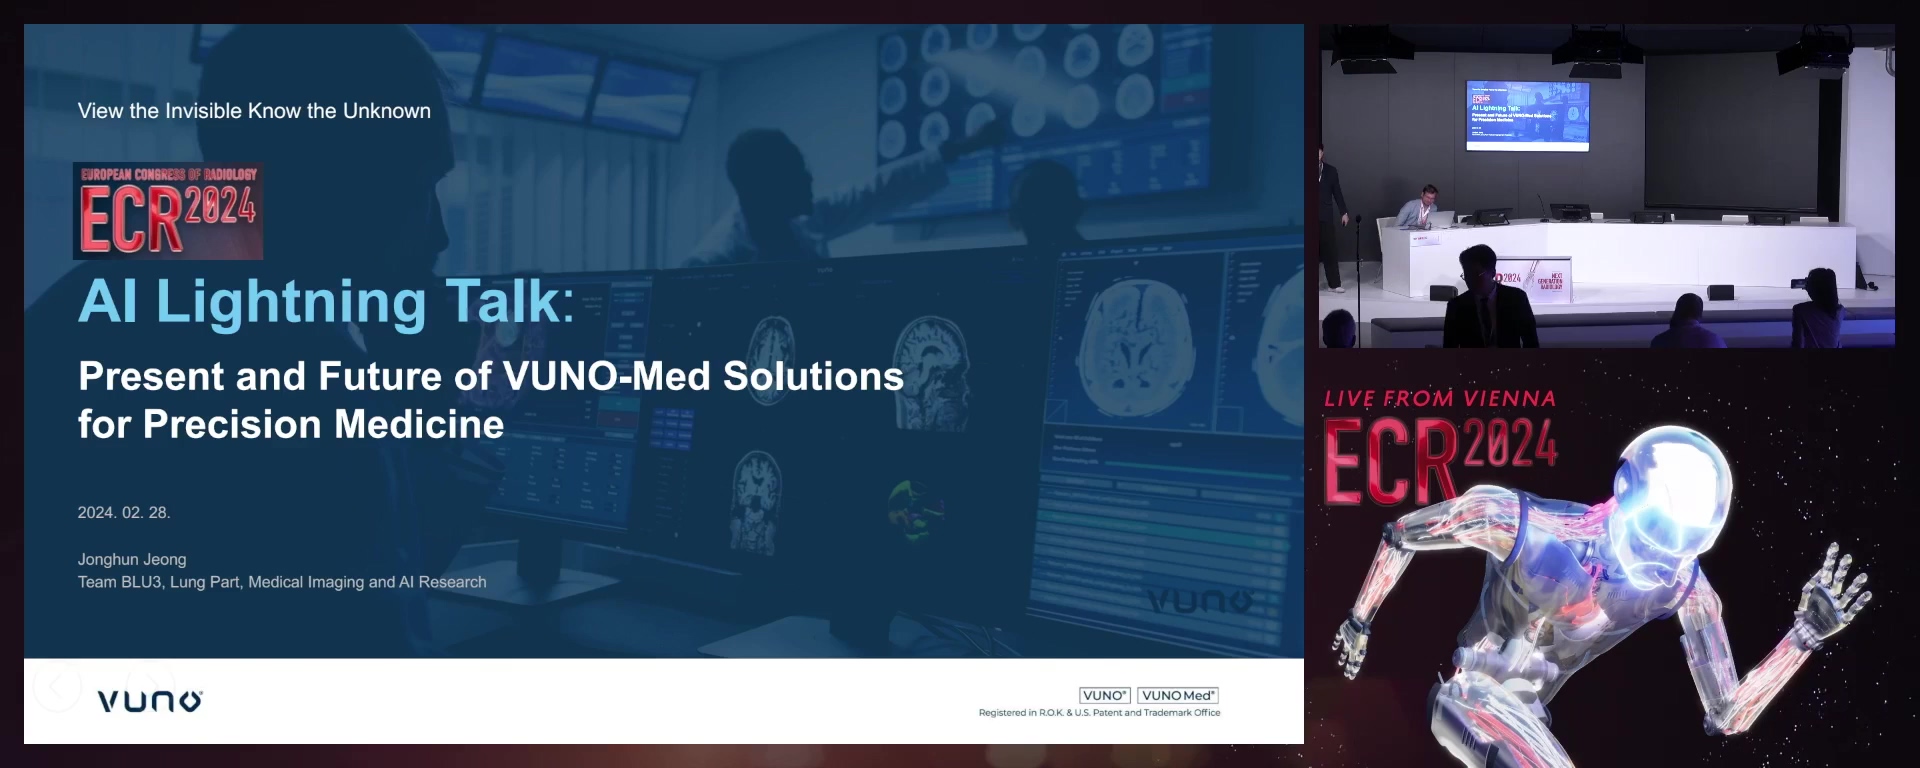 Present and Future of VUNO-Med Solutions for Precision Medicine